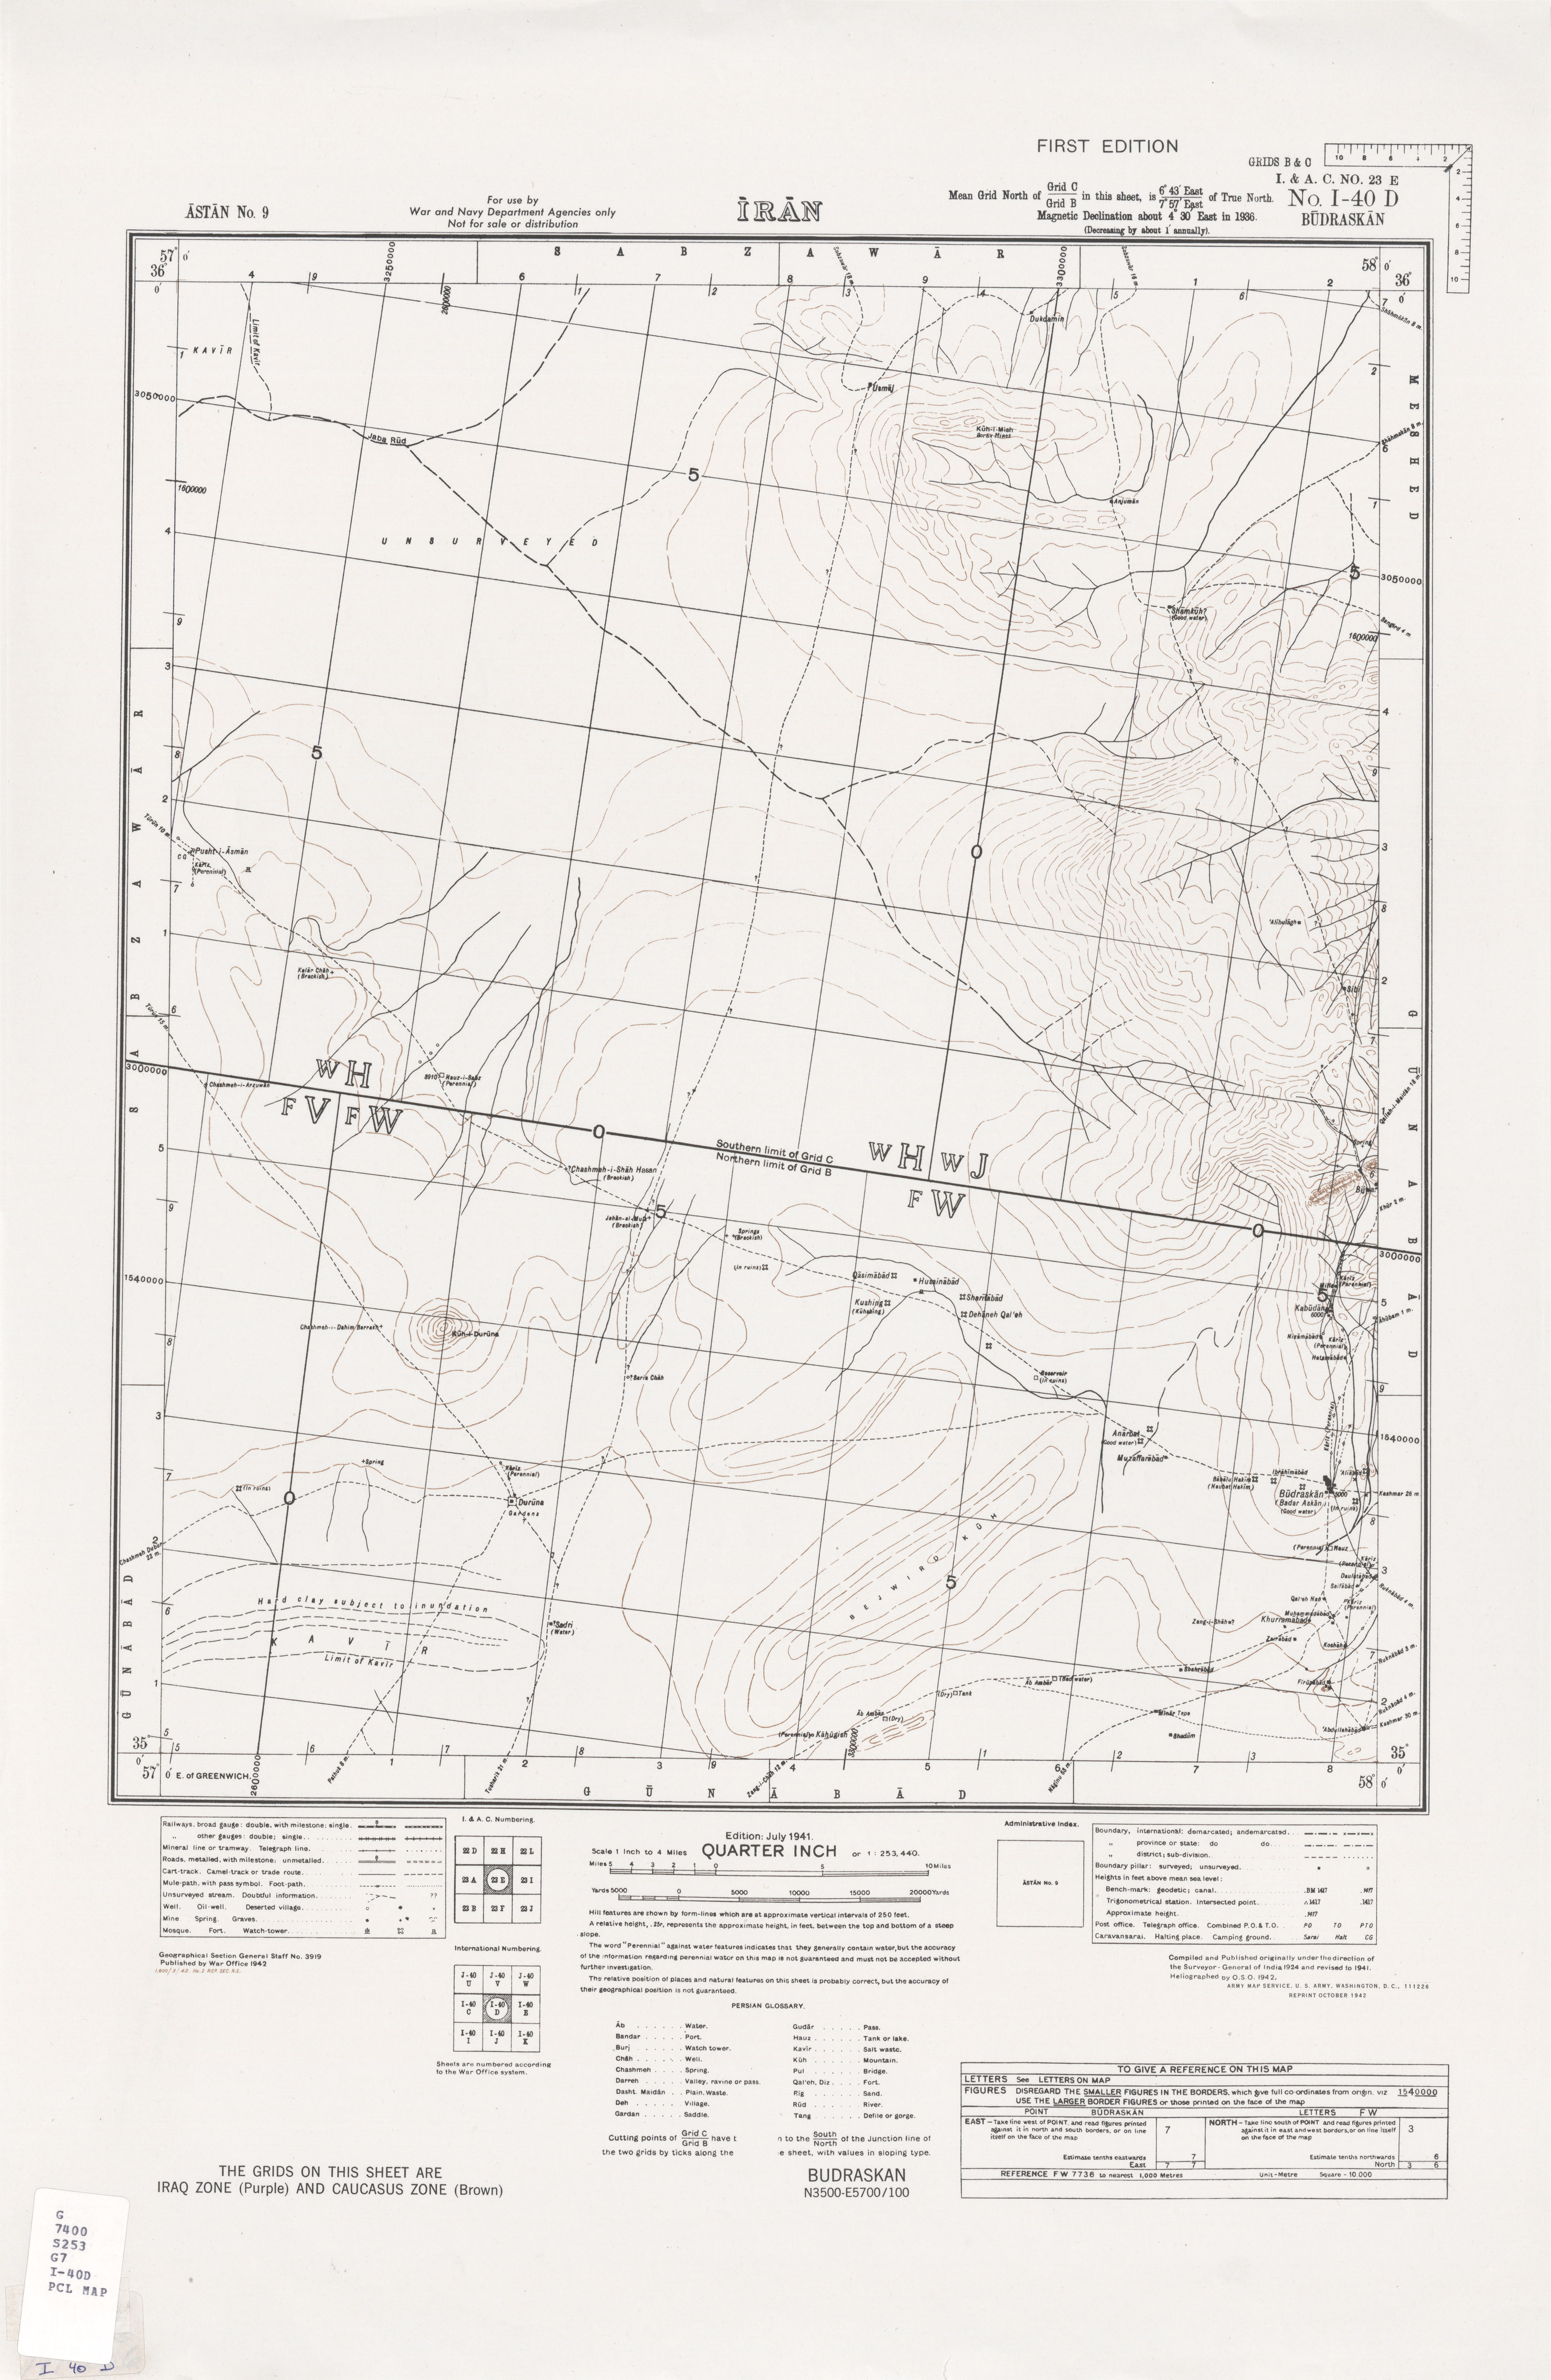 Iraq & Iran AMS Topographic Maps - Perry-CastaÃ±eda Map Collection - UT  Library Online